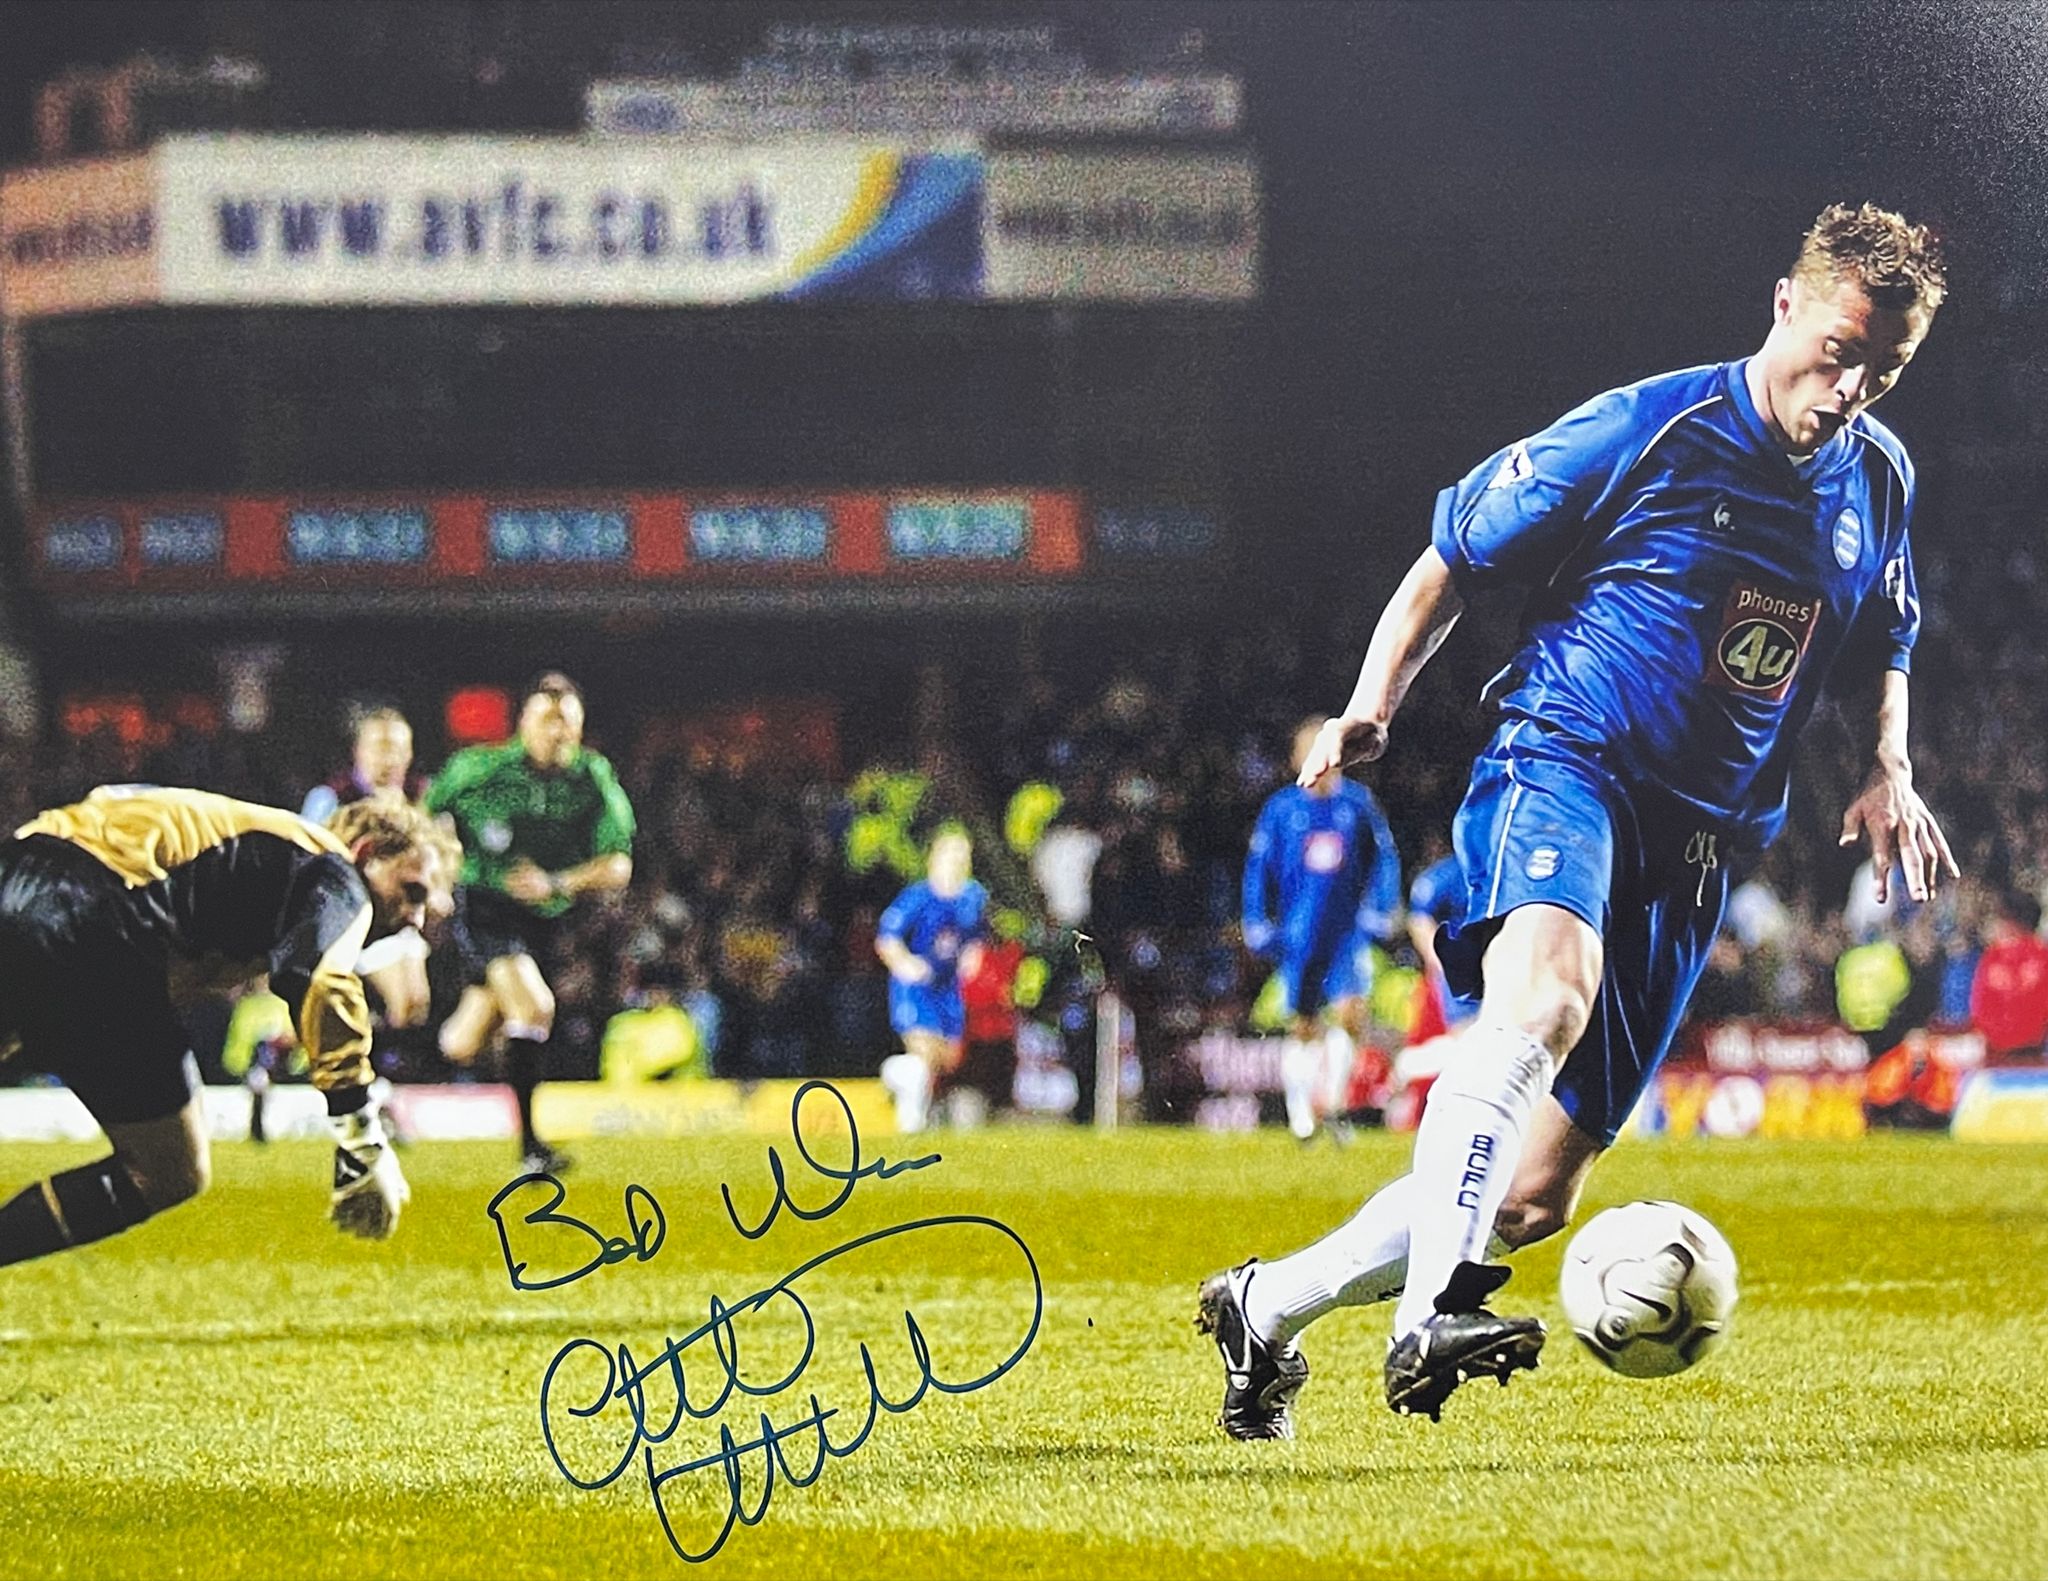 Geoff Horsfield Signed Birmingham City 16 x 12 Photo 3rd March 2003 - Special Offer